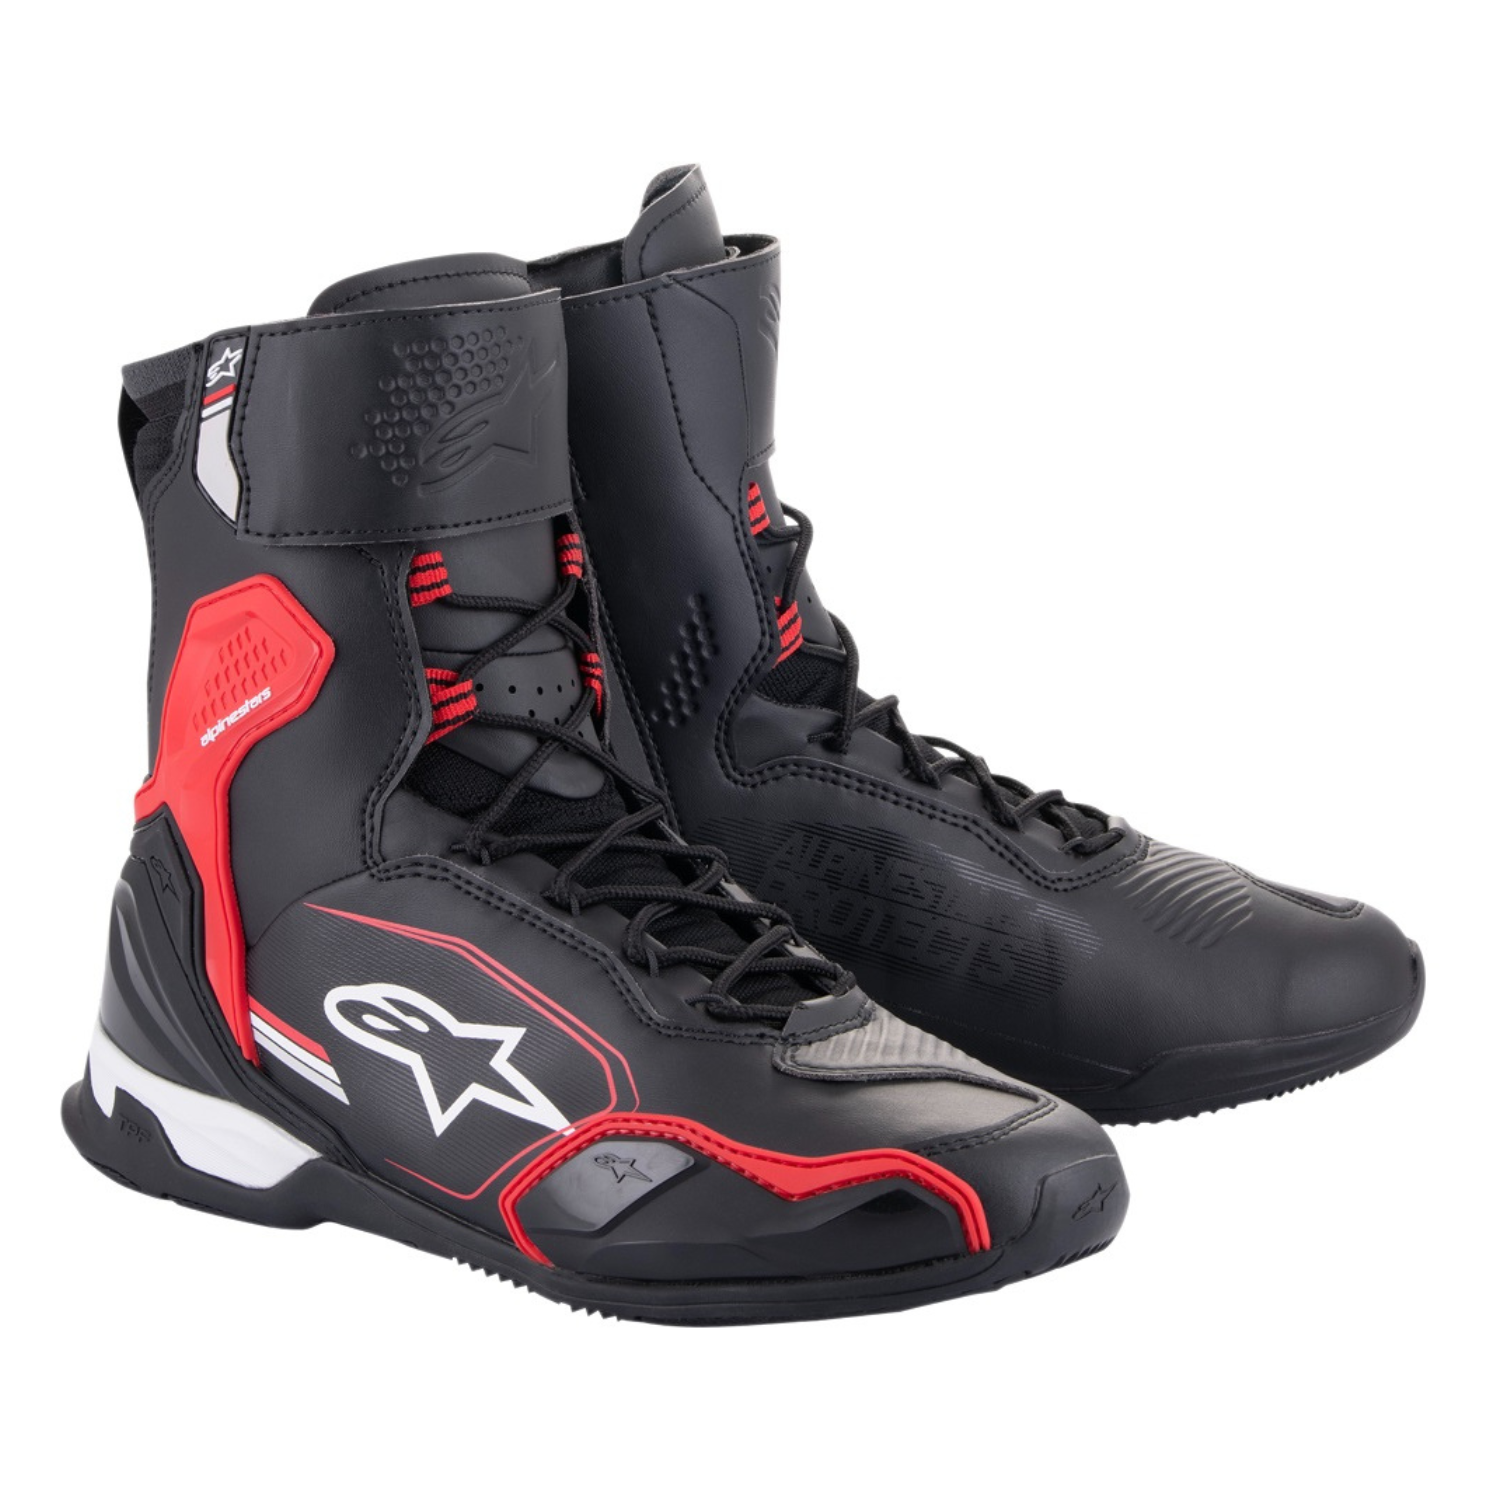 Image of Alpinestars Superfaster Shoes Black Bright Red White Taille US 7